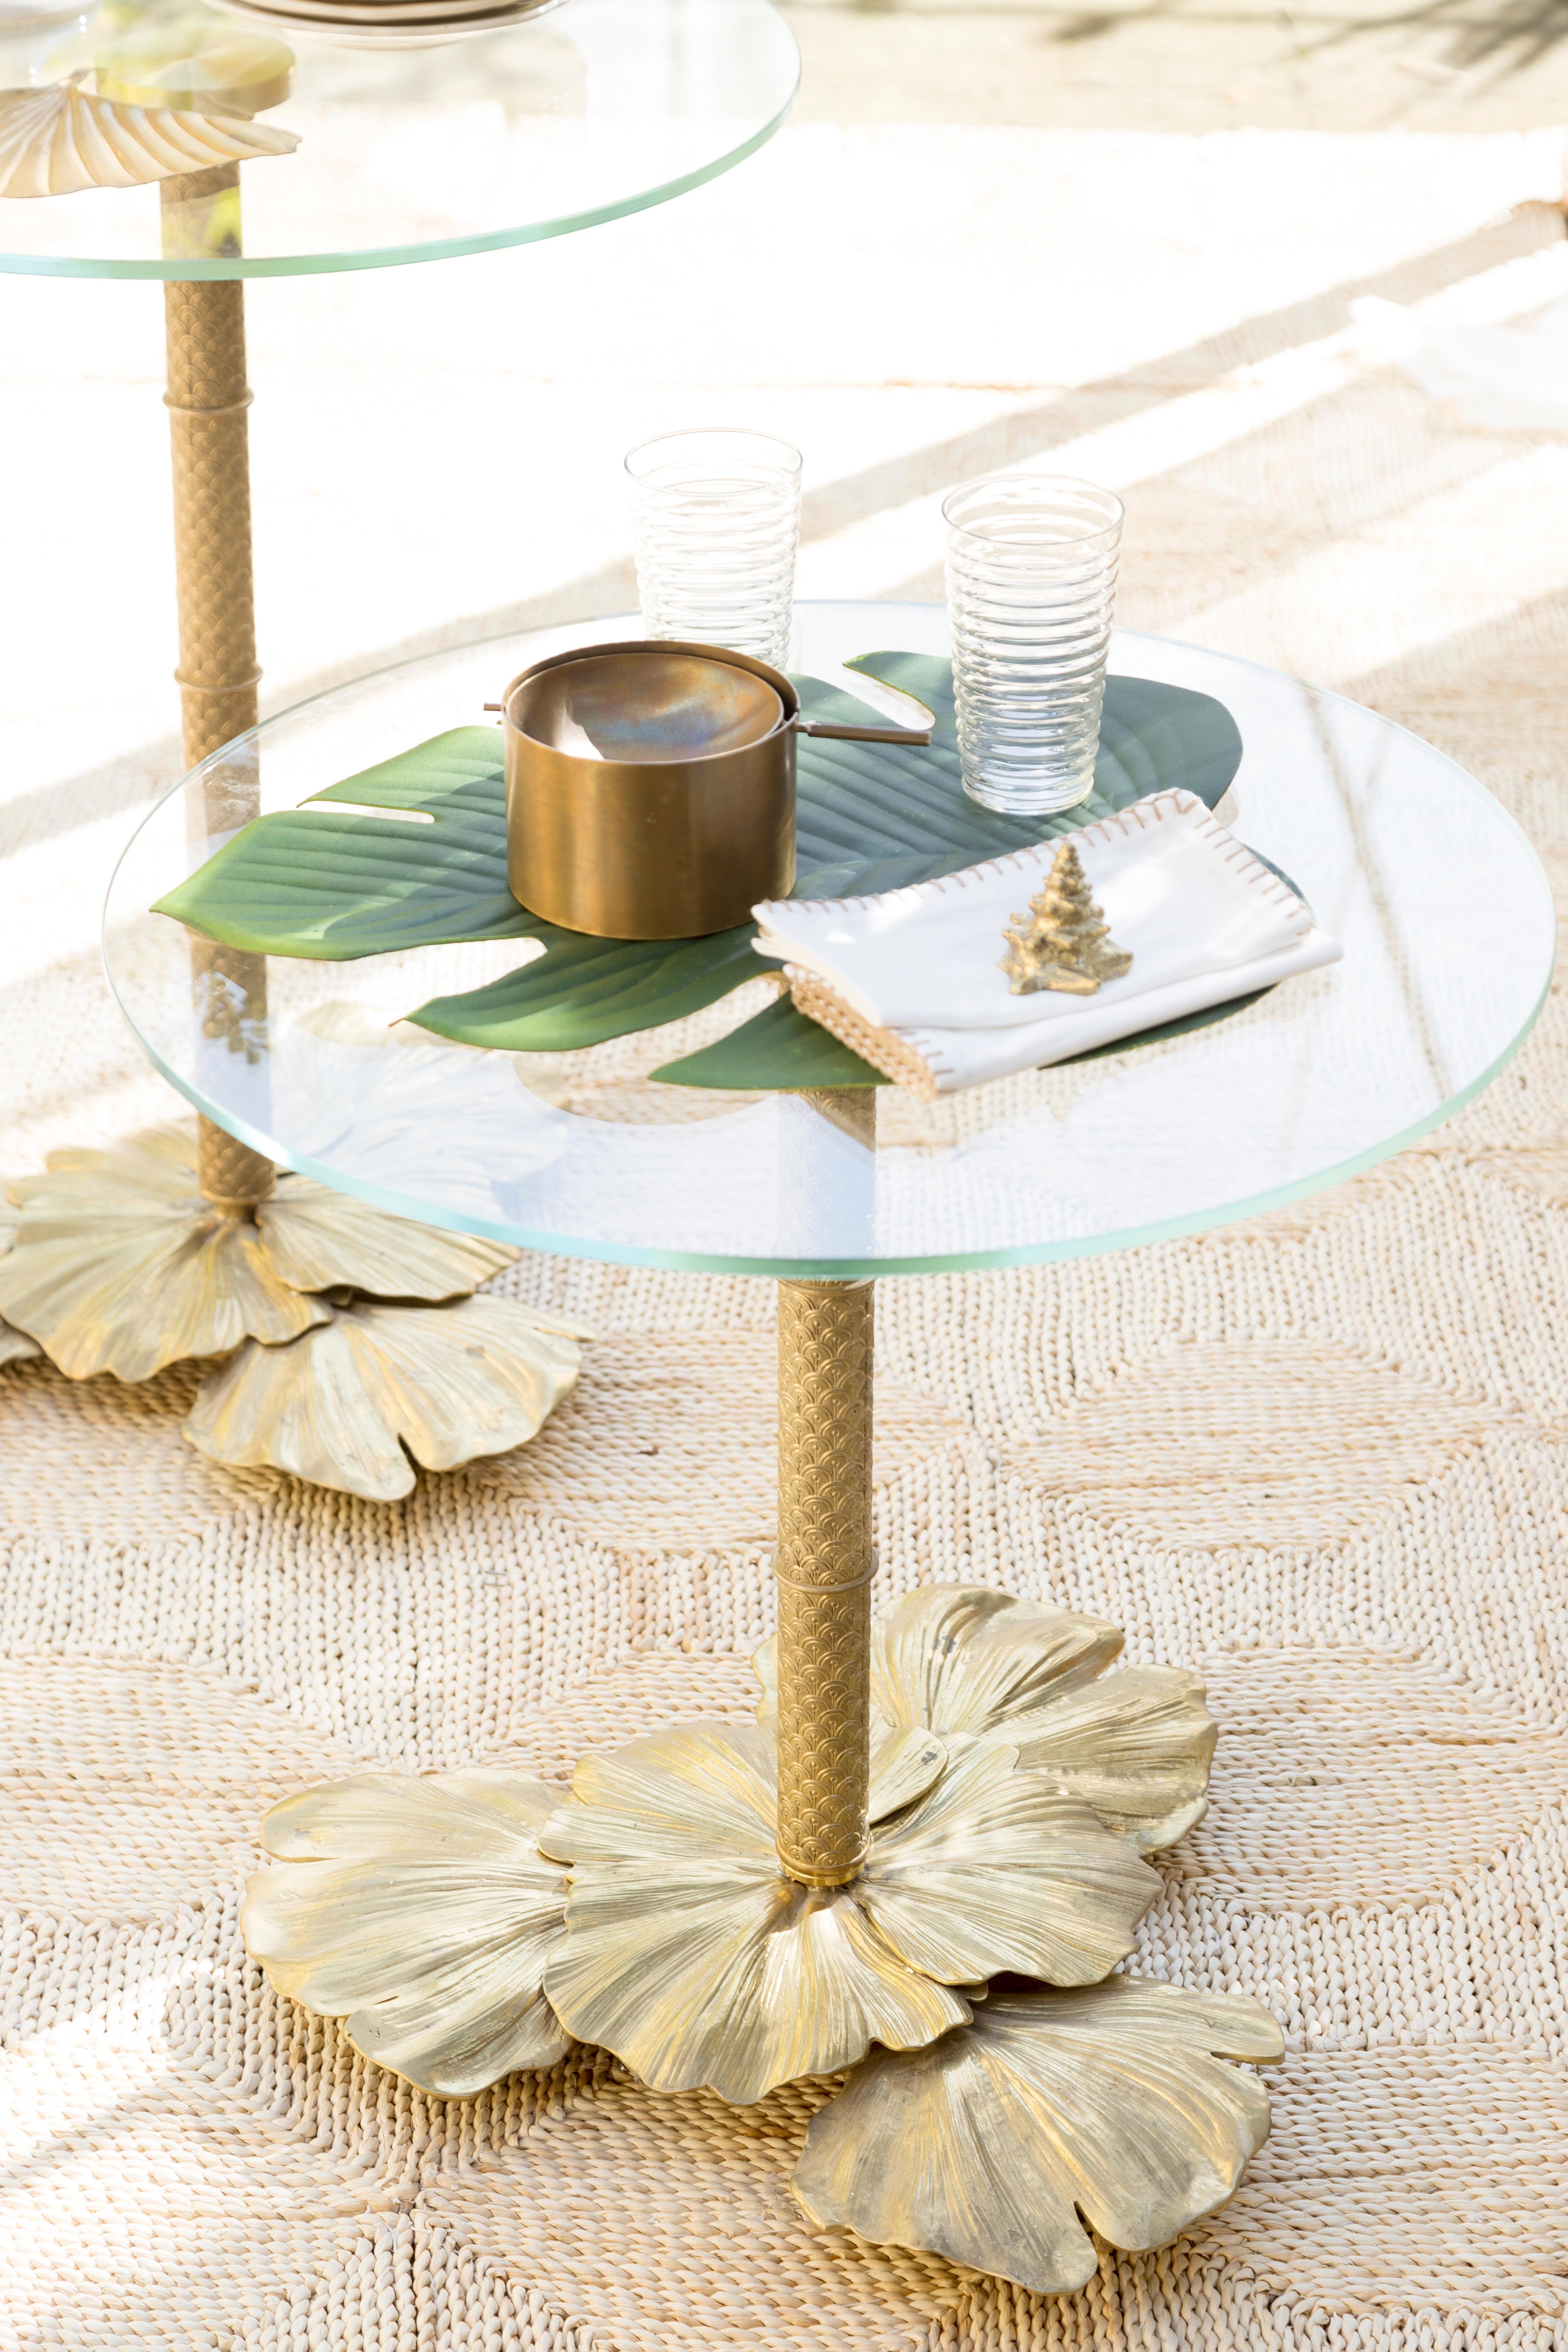 The Ginkgo 01 bistrot table has a brass structure in natural brass finish and a clear glass top, it pertains to the Eclectic collection by Bronzetto where each piece is crafted to create irregular and rought surfaces with uneven finishes which best